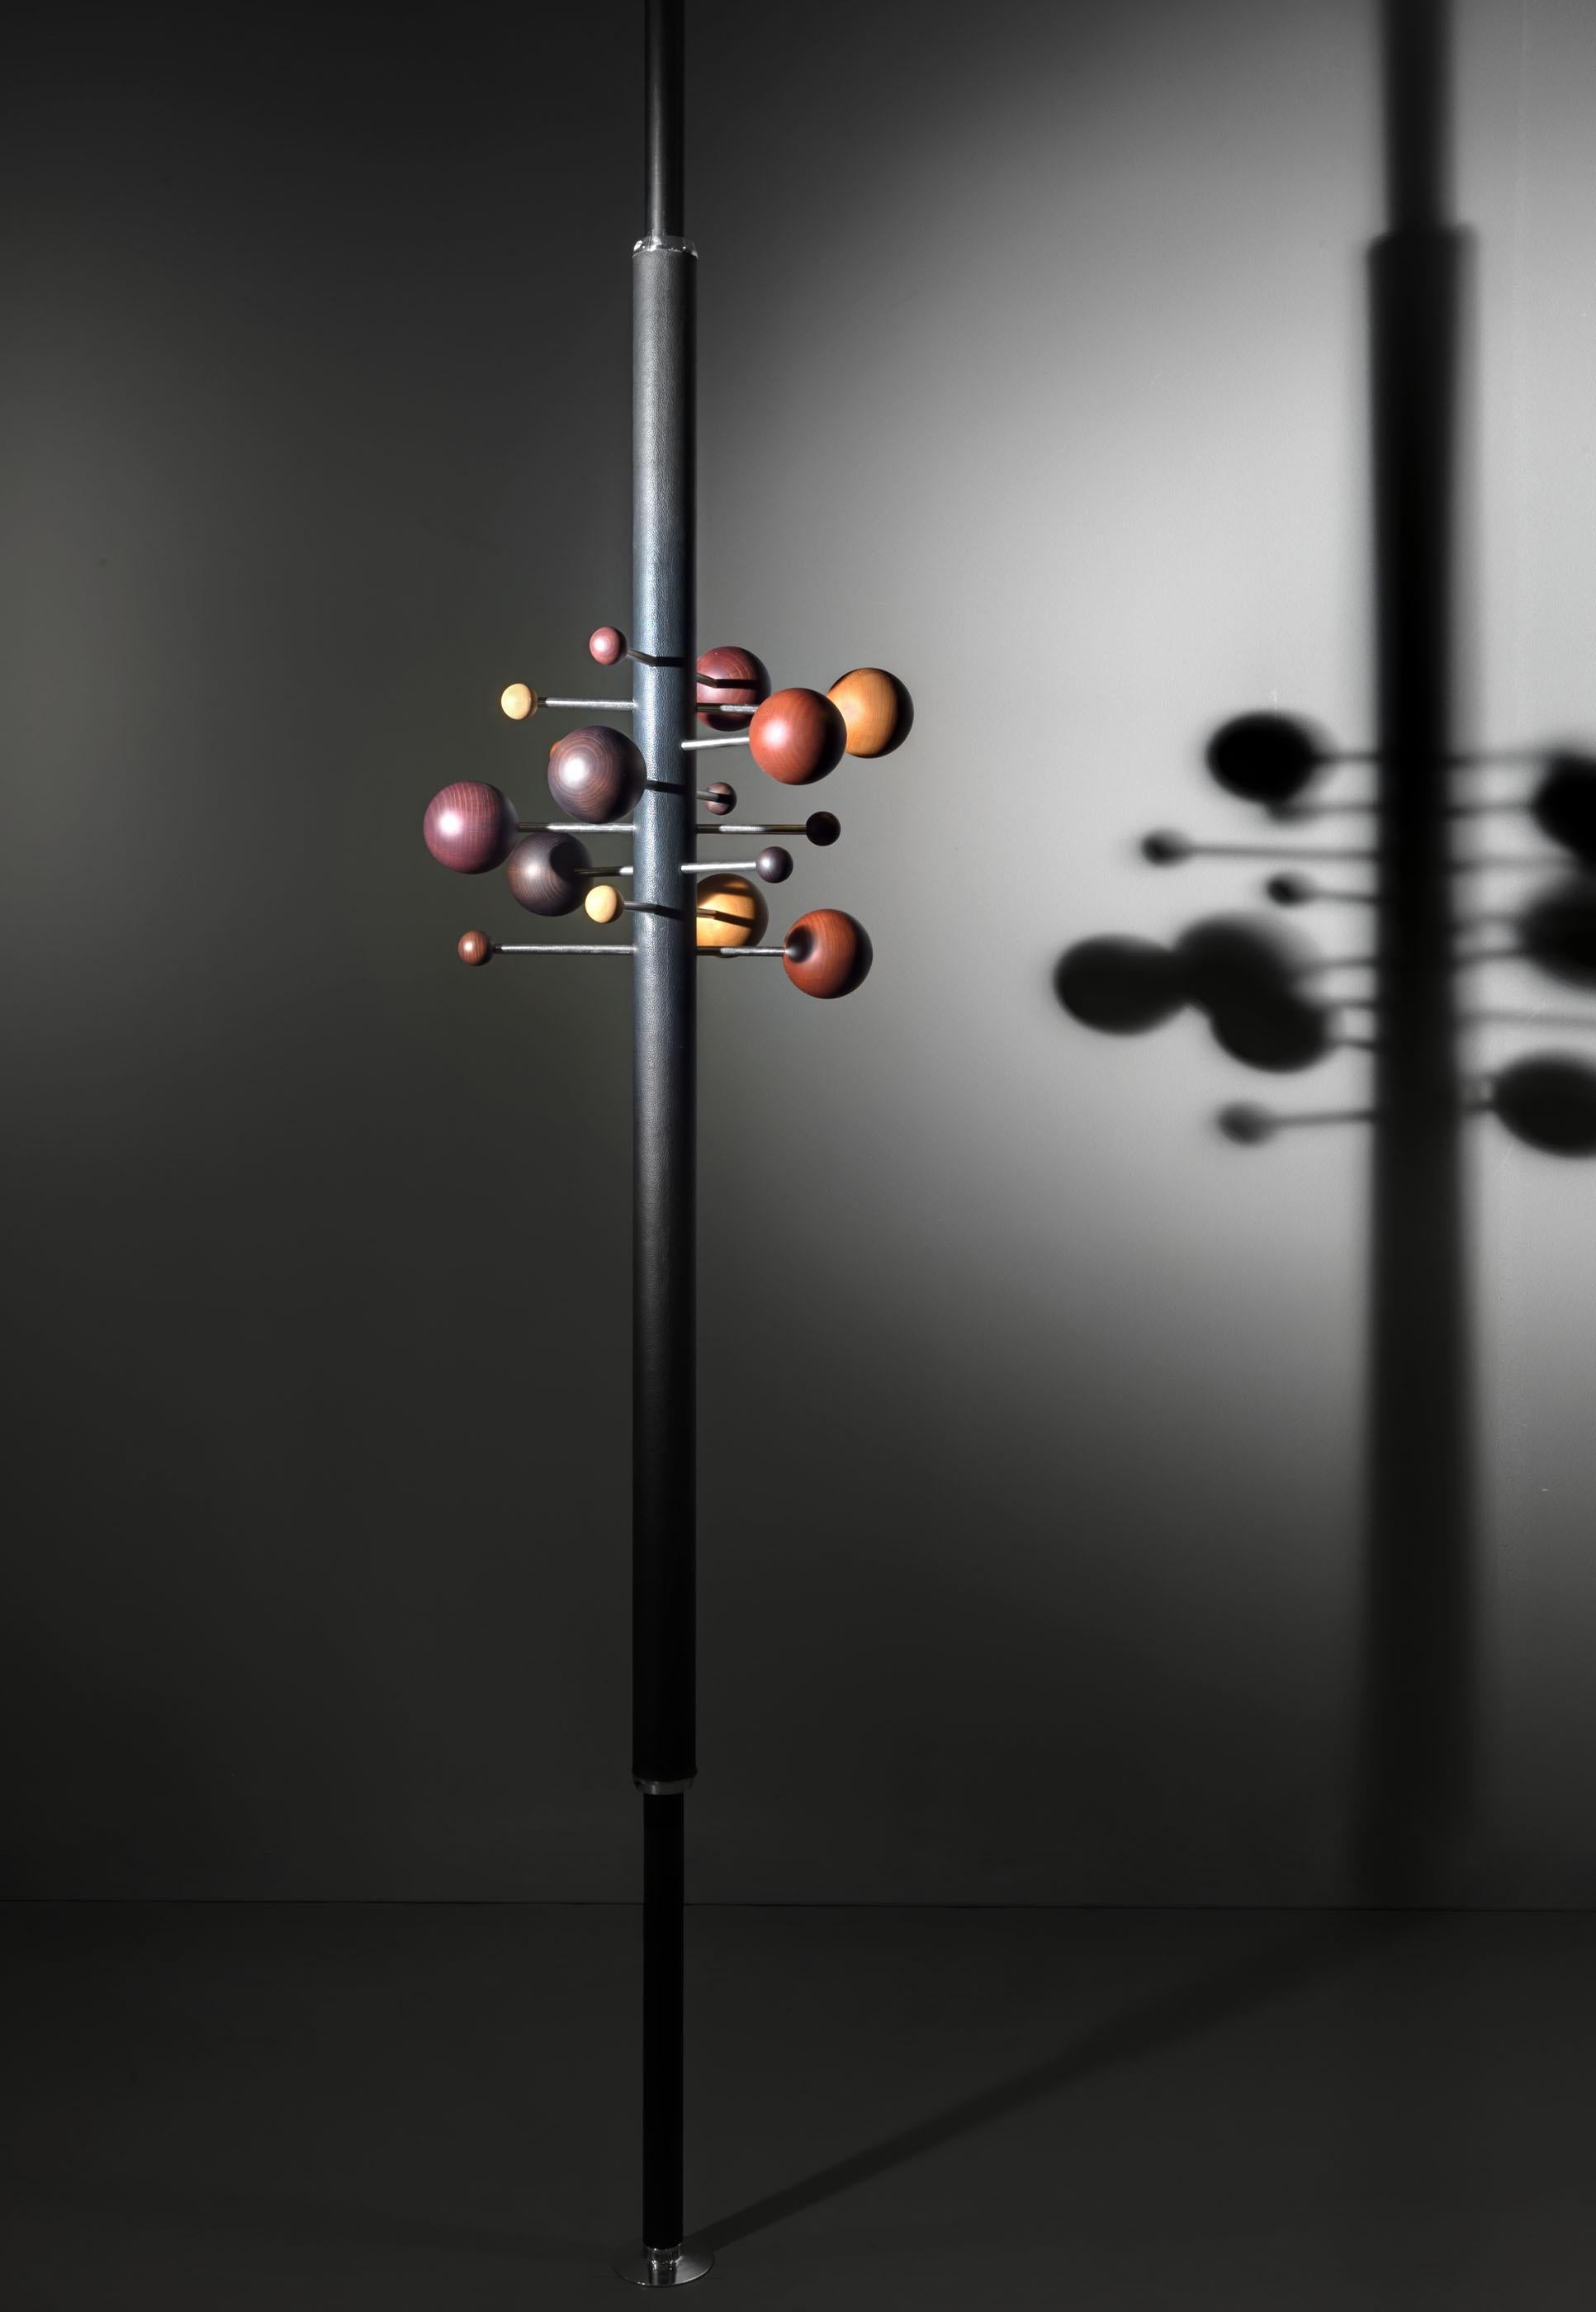 Coat rack model AT16, designed in 1961 by Italian designer Osvaldo Borsani, is a compressed rotating coat hanger composed of two interlocking leather covered aluminum tubes with brushed stainless steel rods with coat hanger balls on either end. Rods